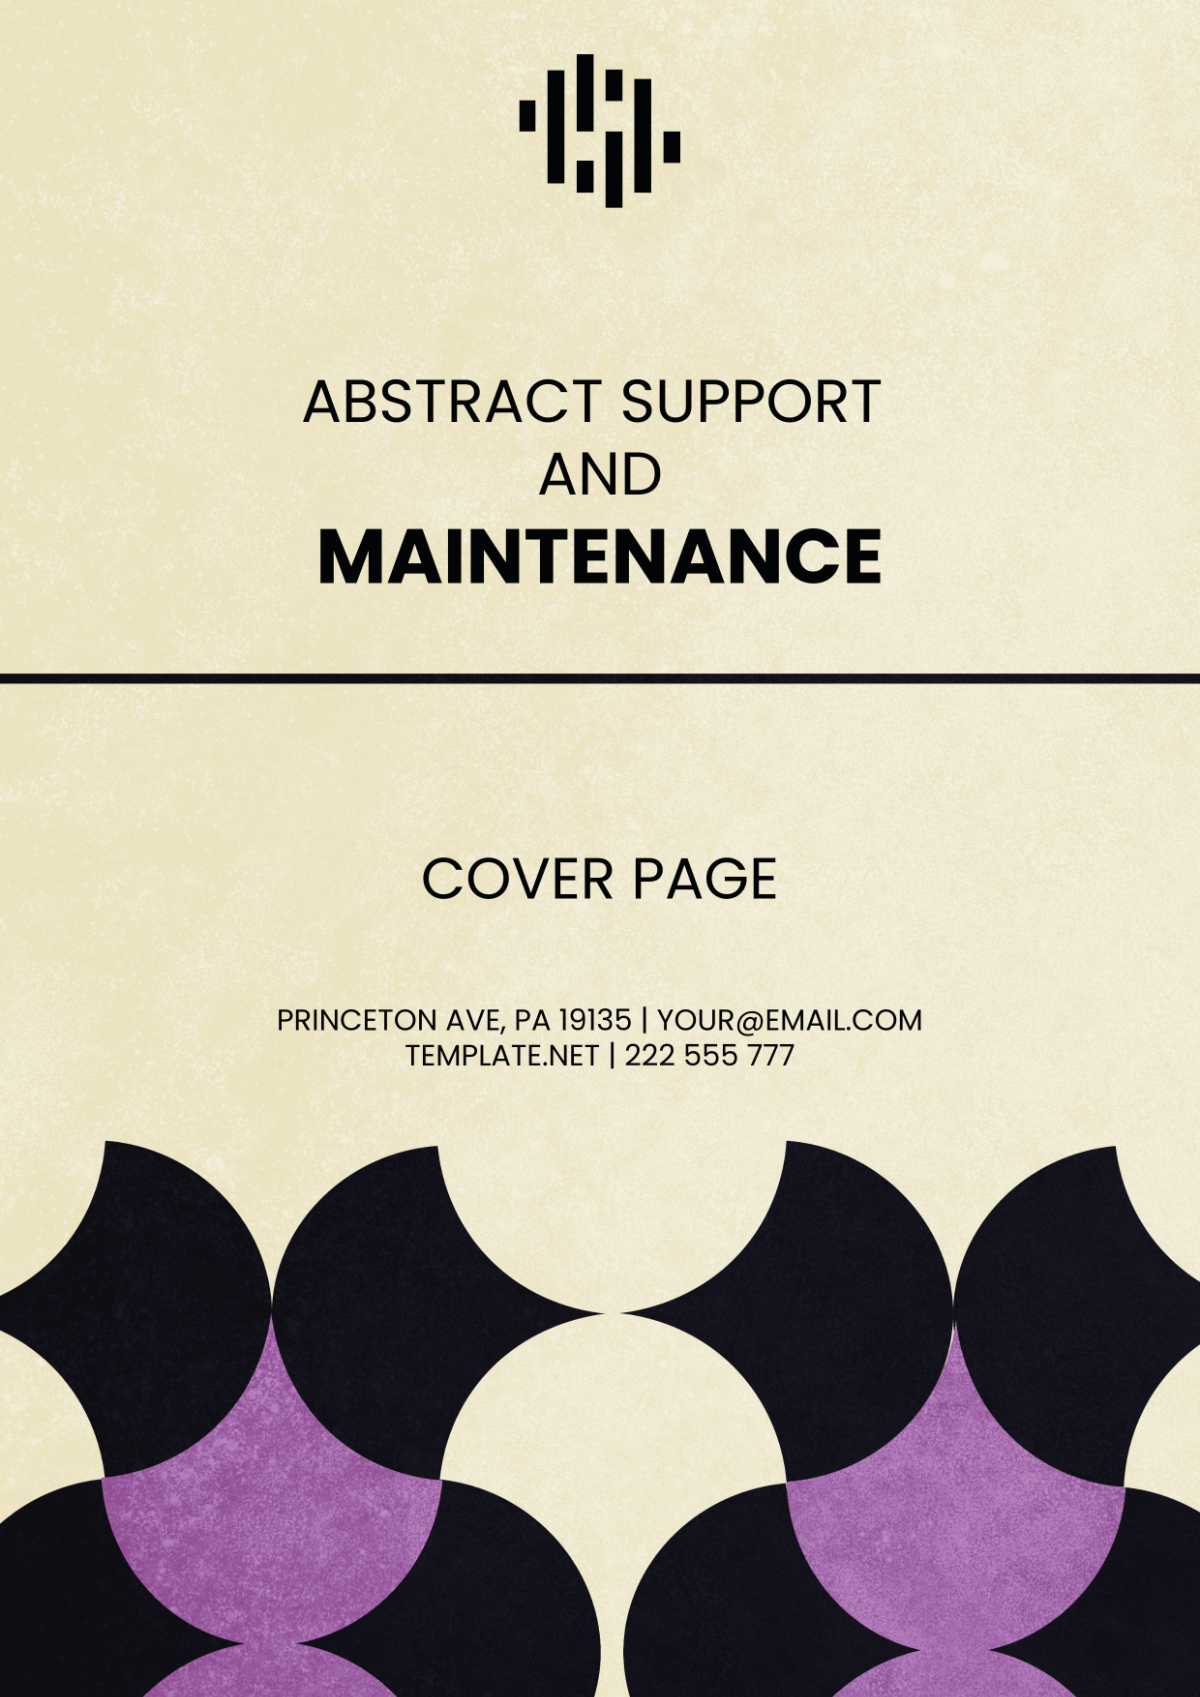 Abstract Support and Maintenance Cover Page Template